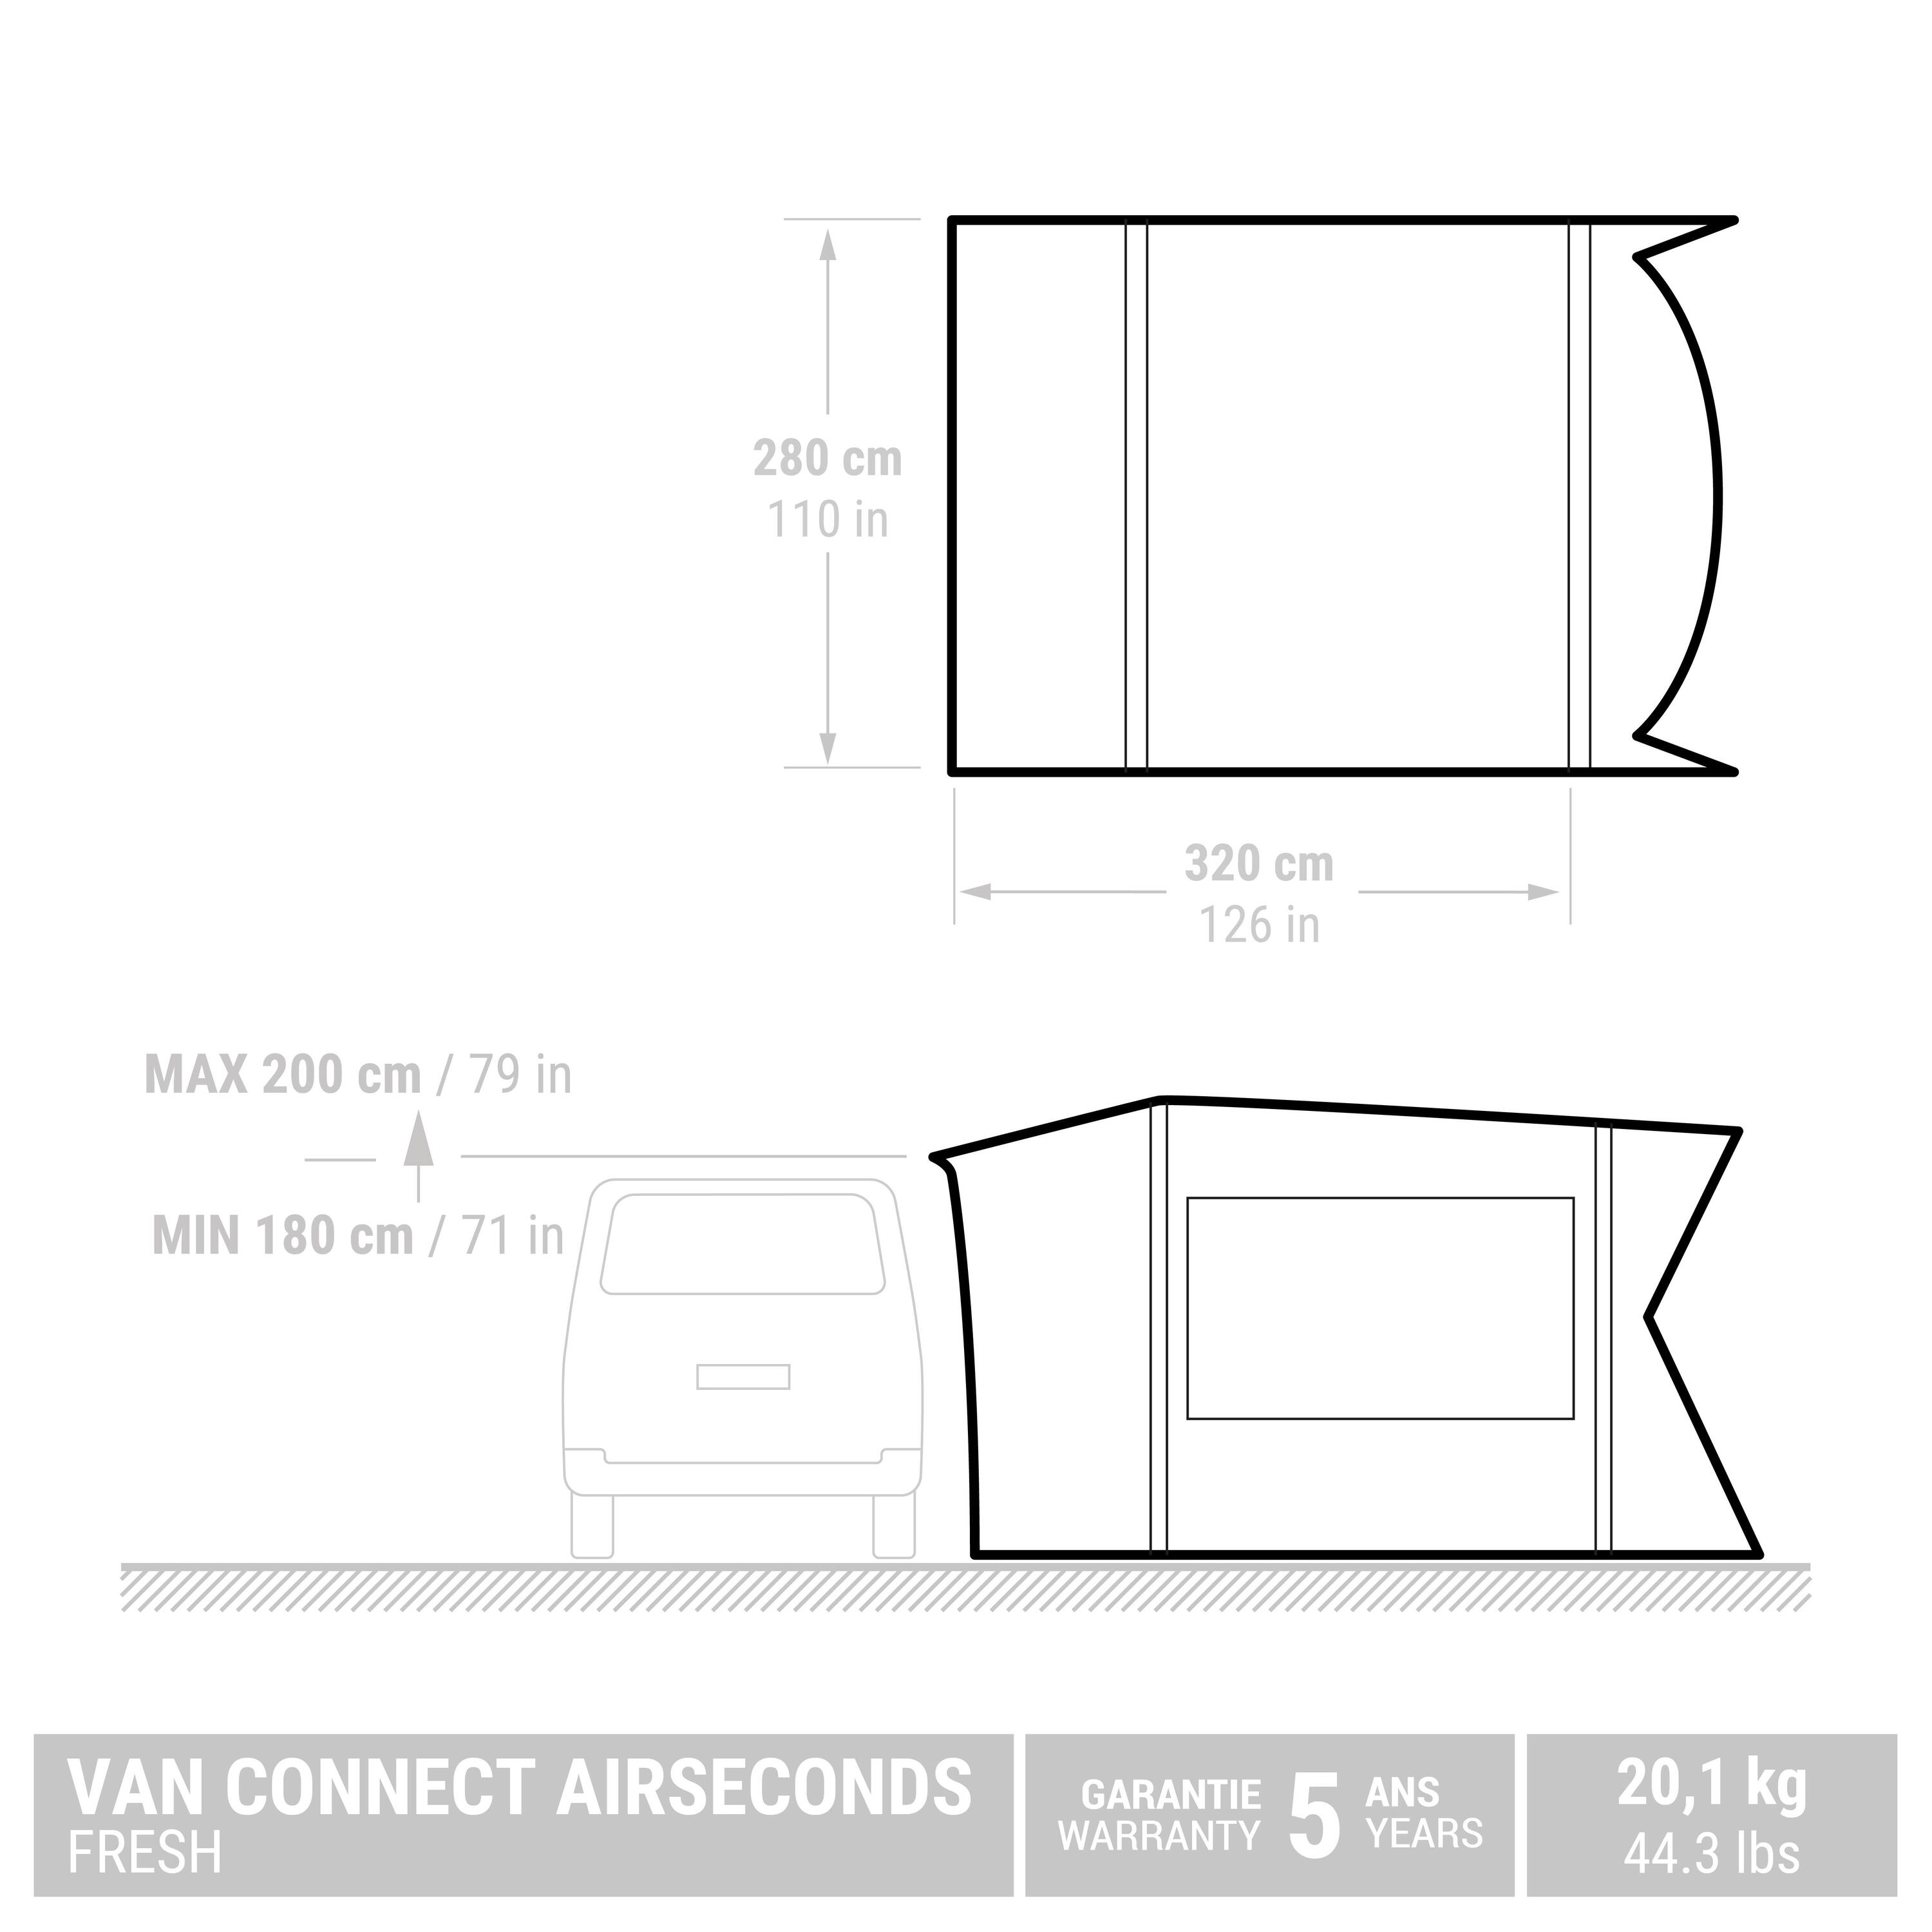 Van and truck inflatable canopy - Van Connect Air Seconds Fresh - 6 people 2/15